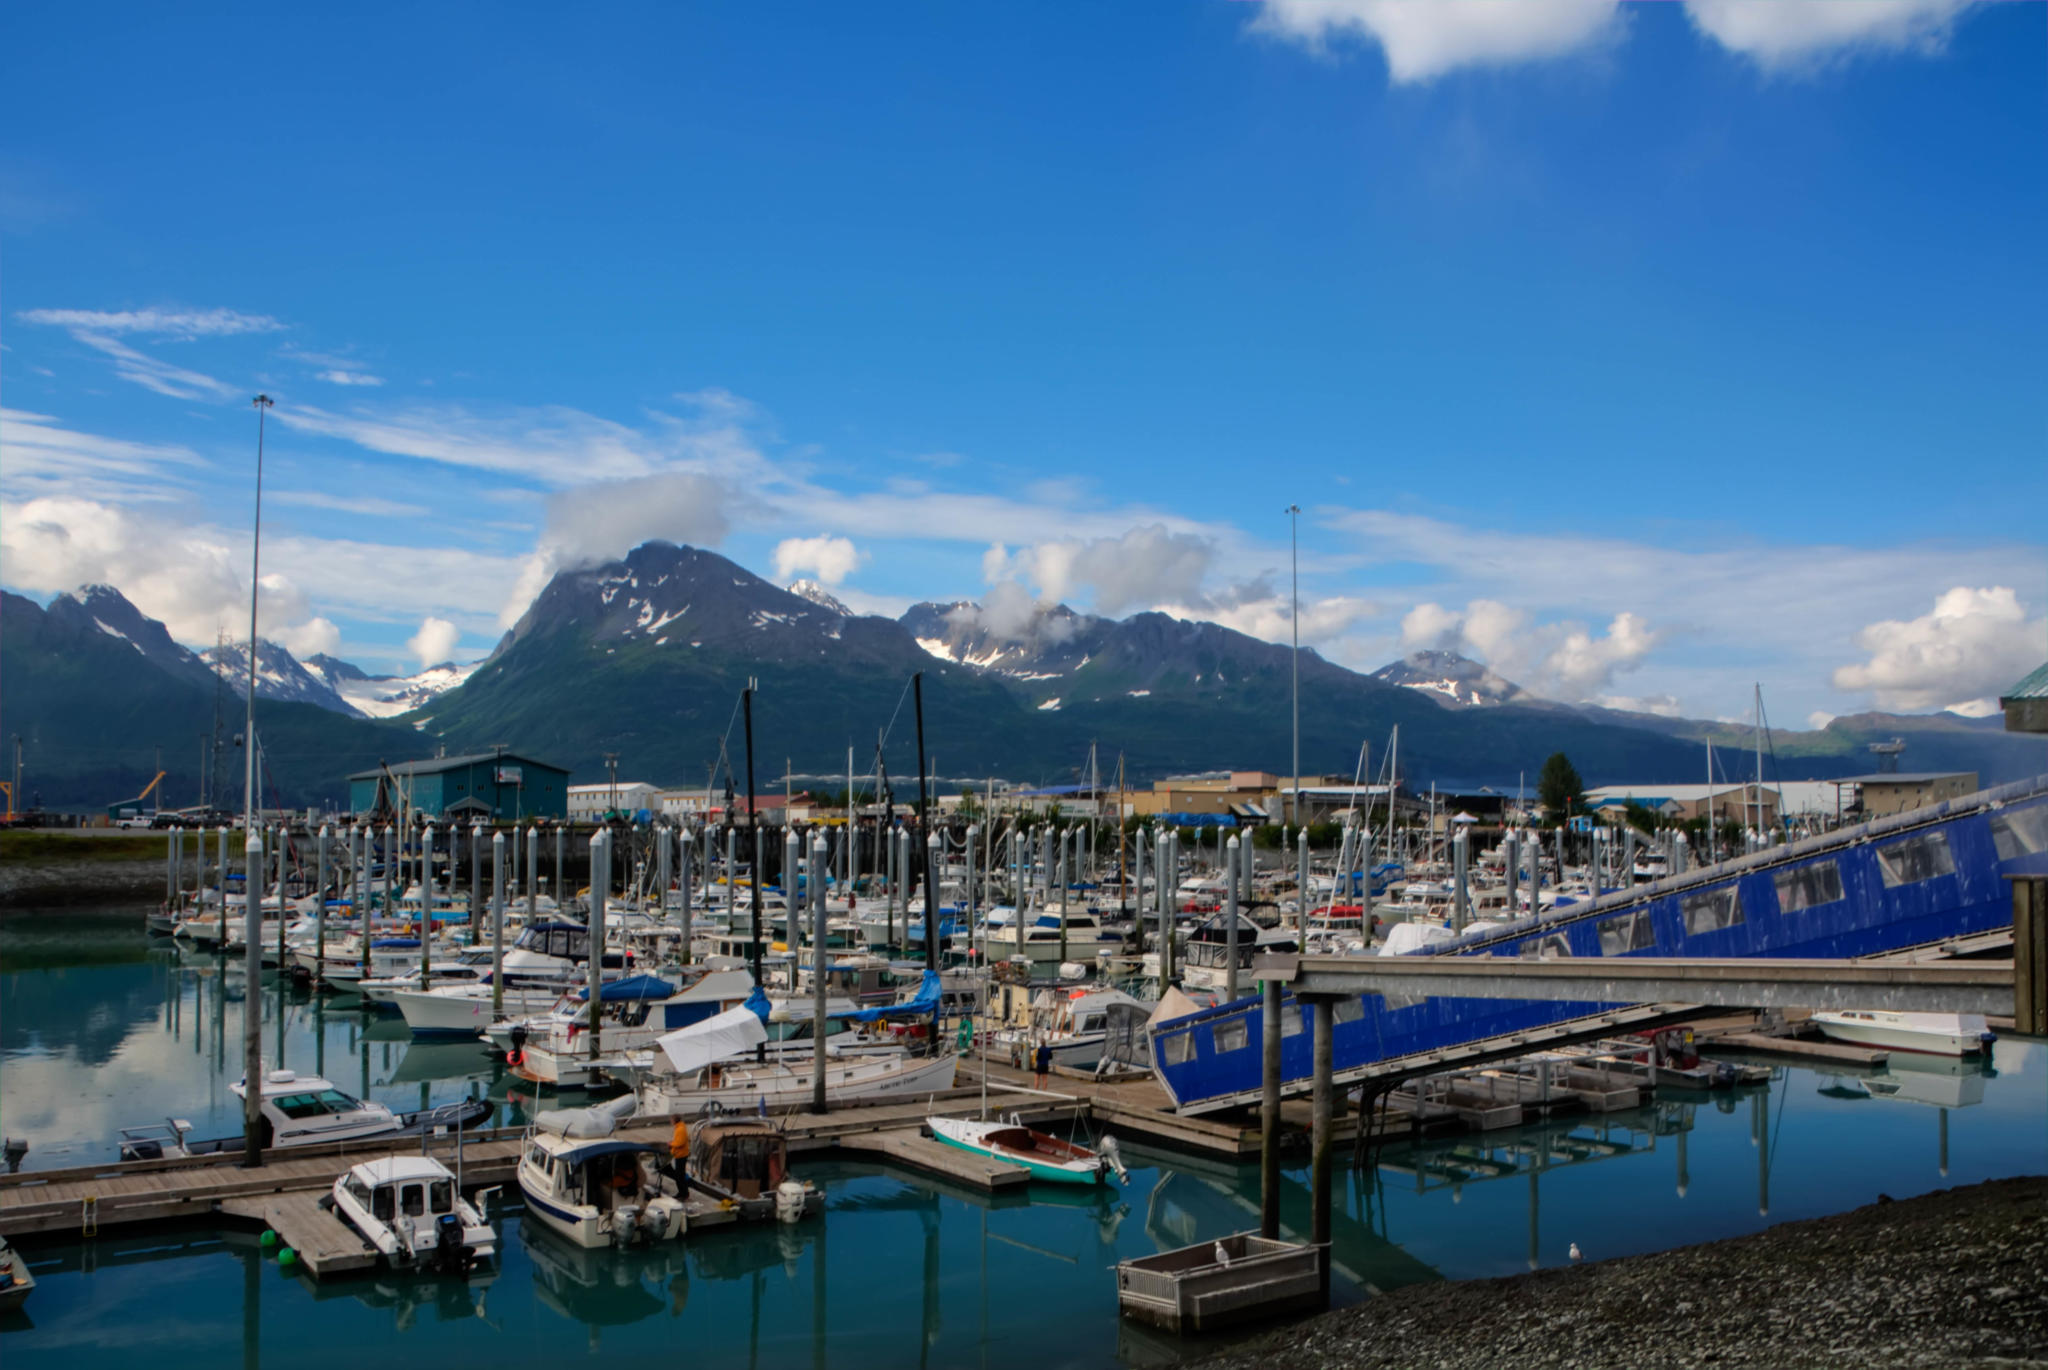 A seafood worker in Valdez has COVID19, but state health officials don